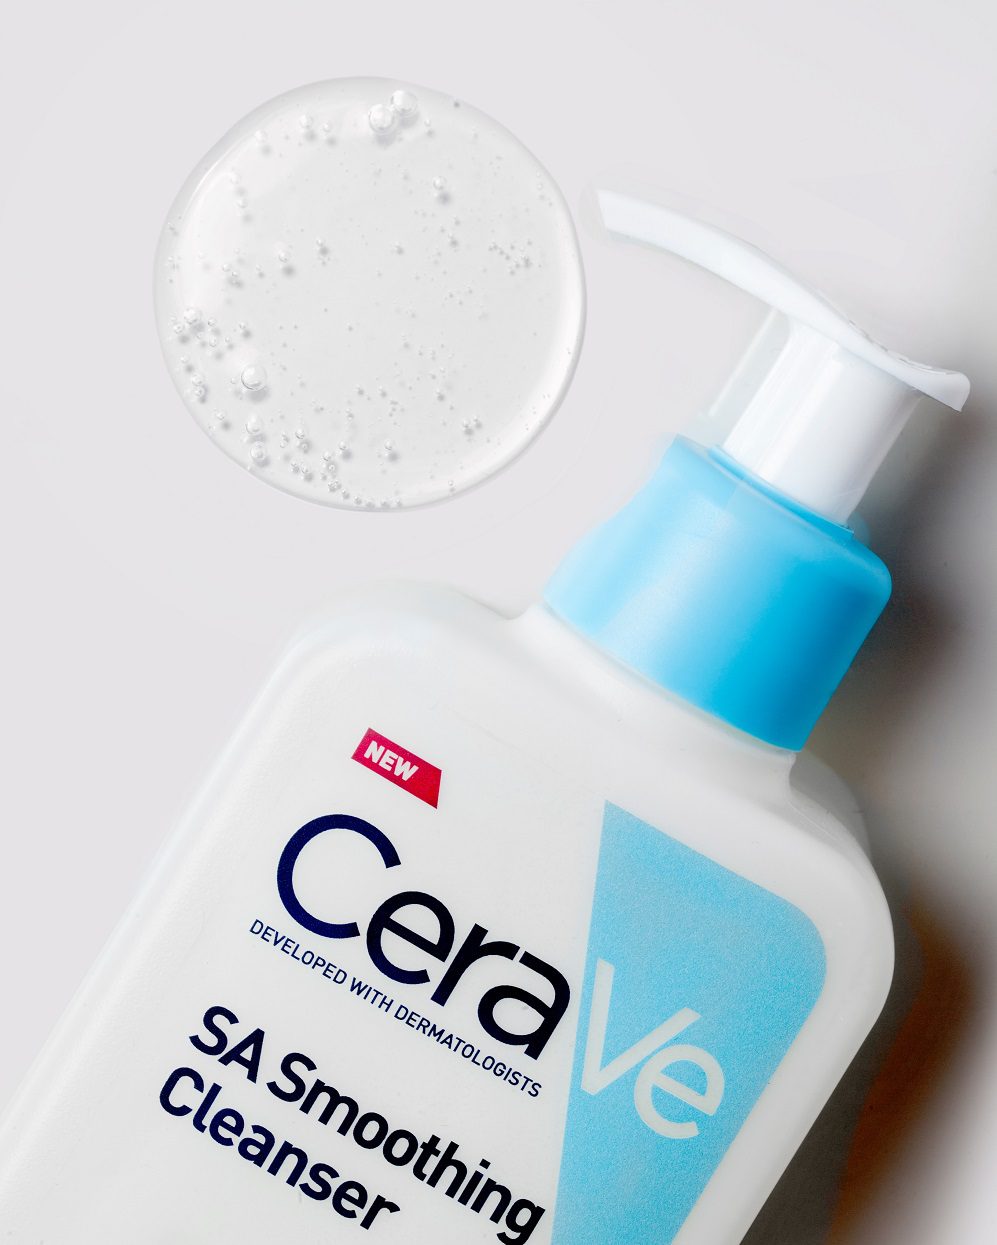 CeraVe_SA Smooting Cleanser